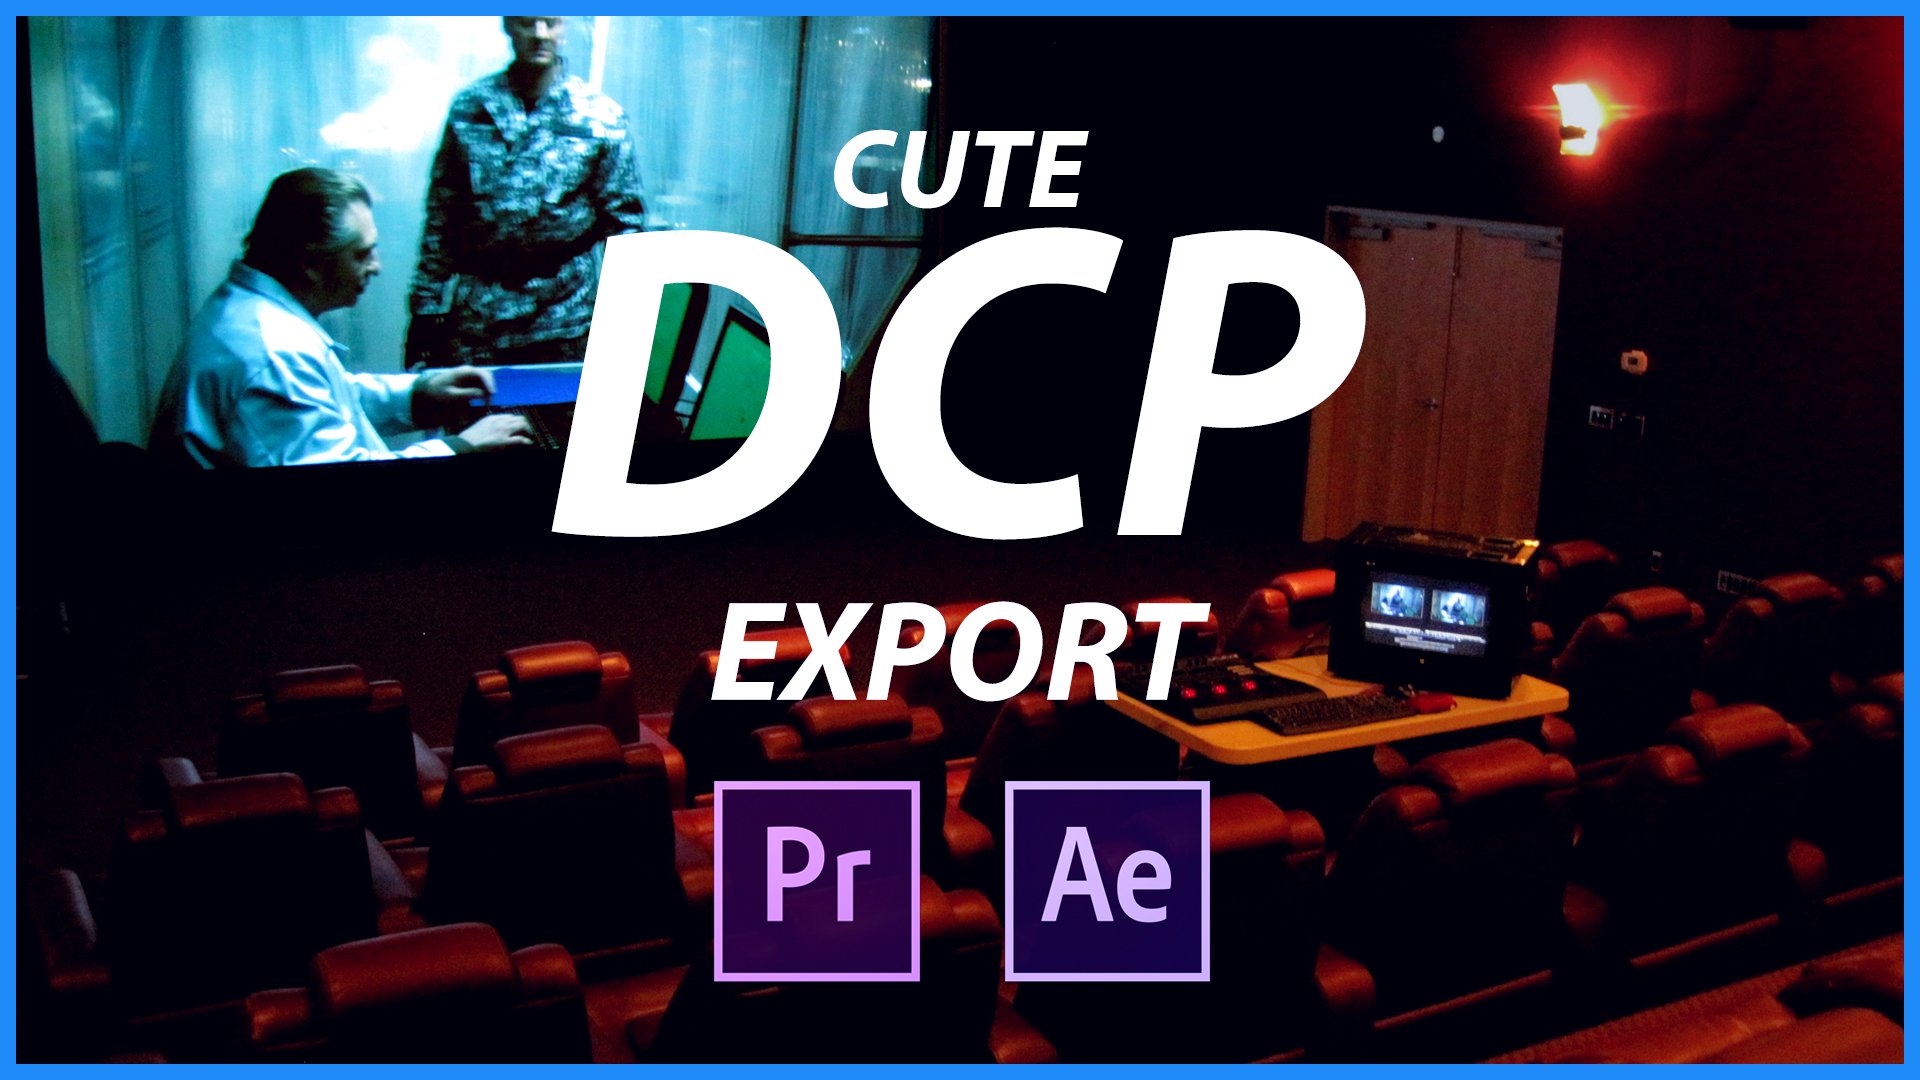 CuteDCP Export - PREMIERE PRO / AFTER EFFECTS